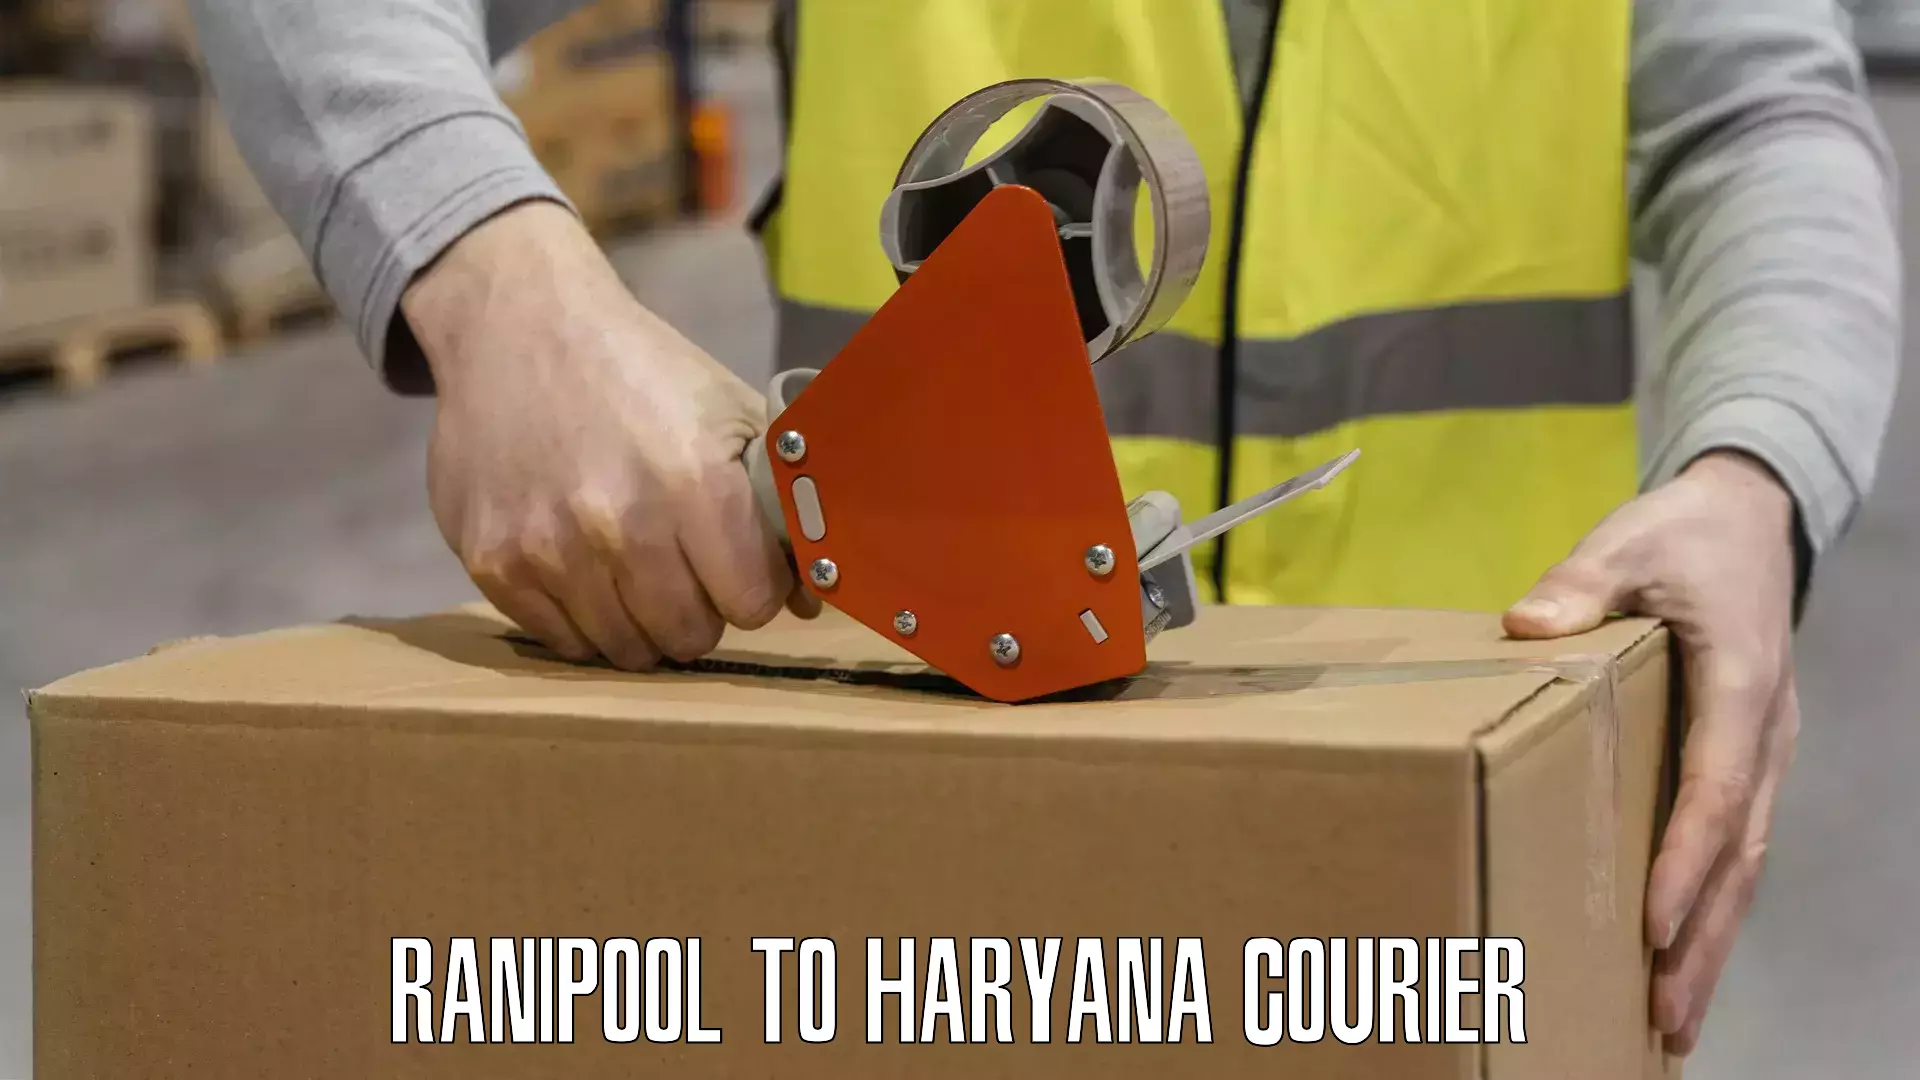 24-hour delivery options in Ranipool to Haryana